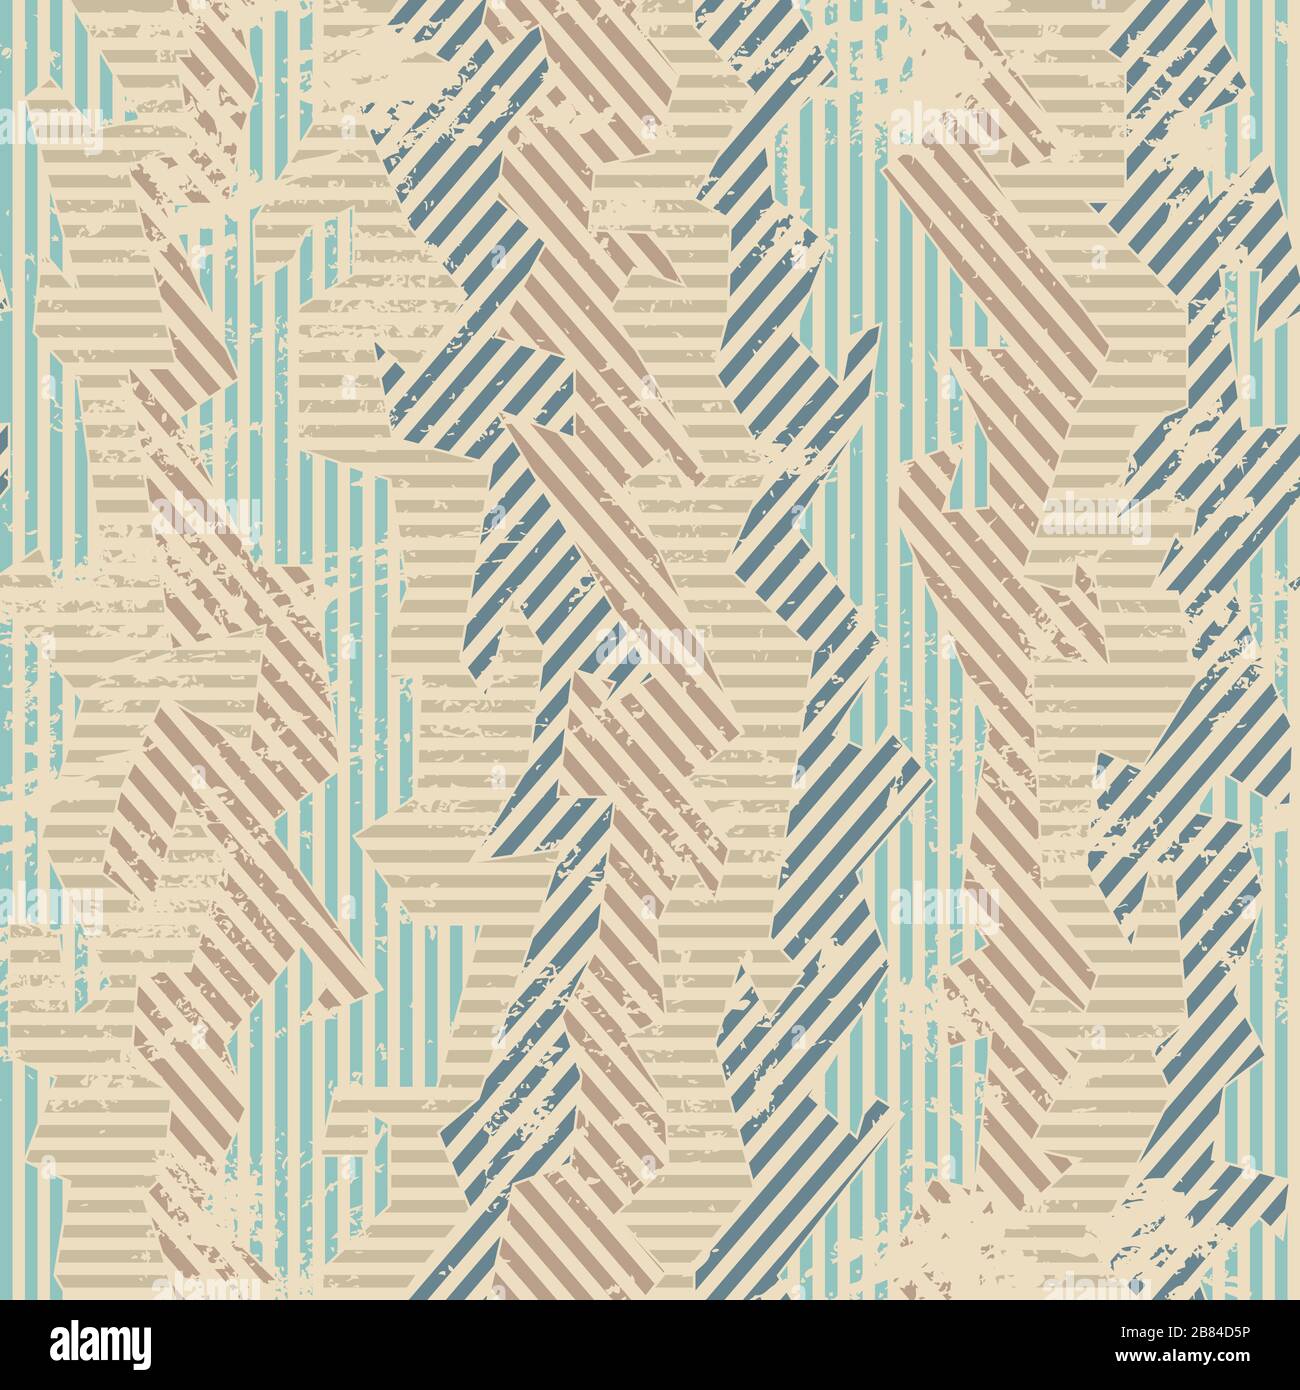 vintage fabric seamless patten with grunge effect Stock Vector